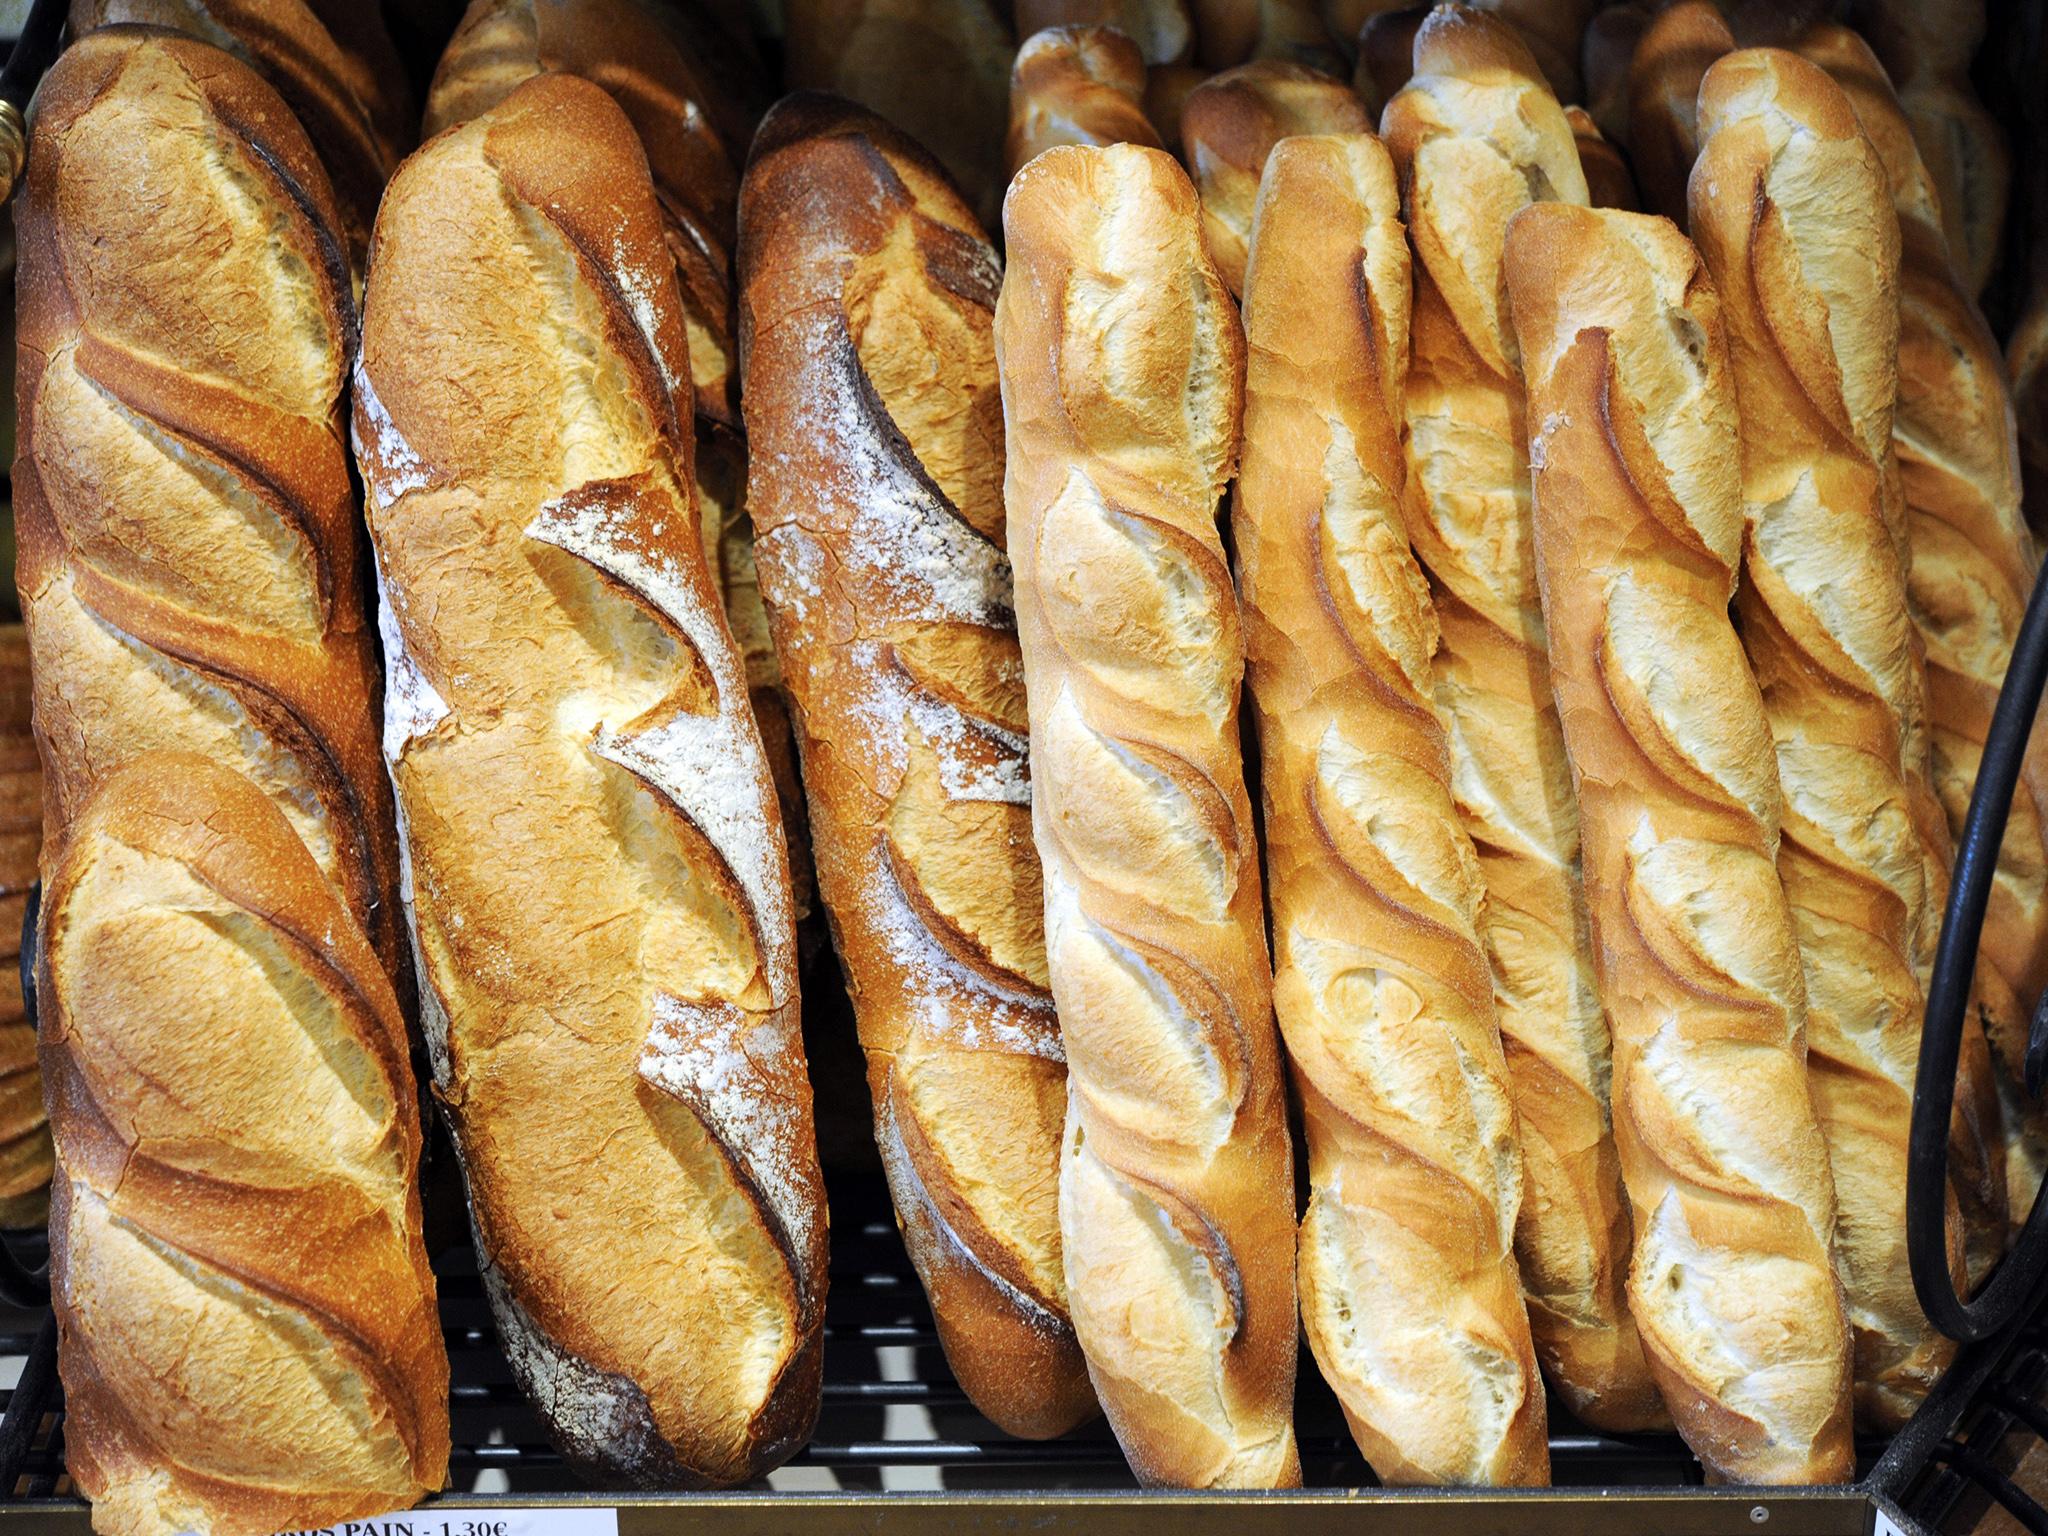 On parade: from the ubiquitous baguette to the Pain de Campagne